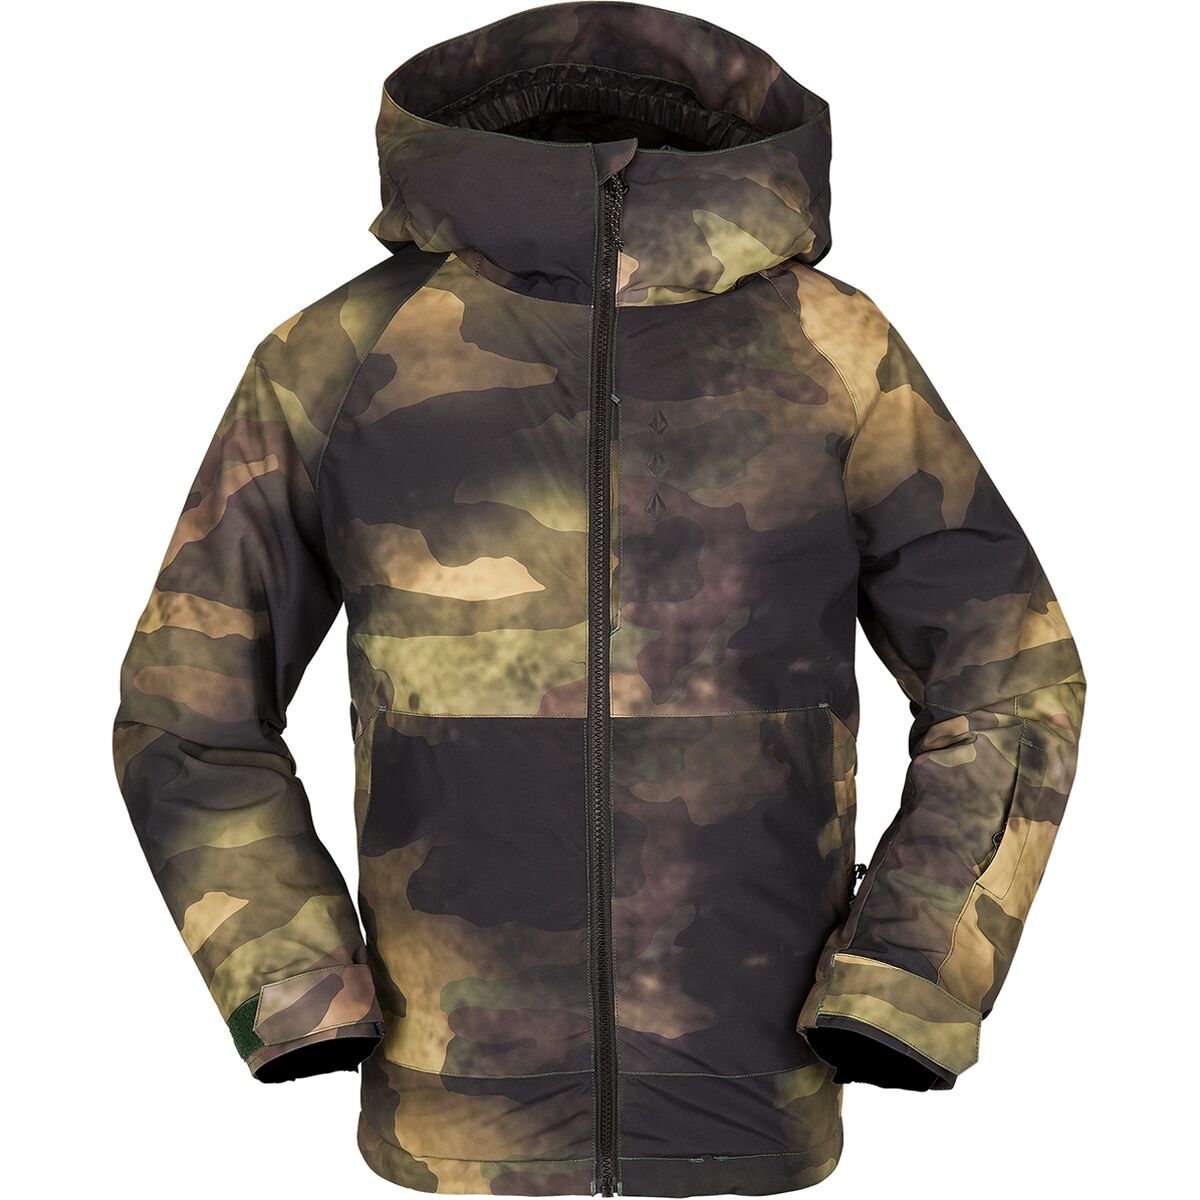 Breck Insulated Jacket - Boys